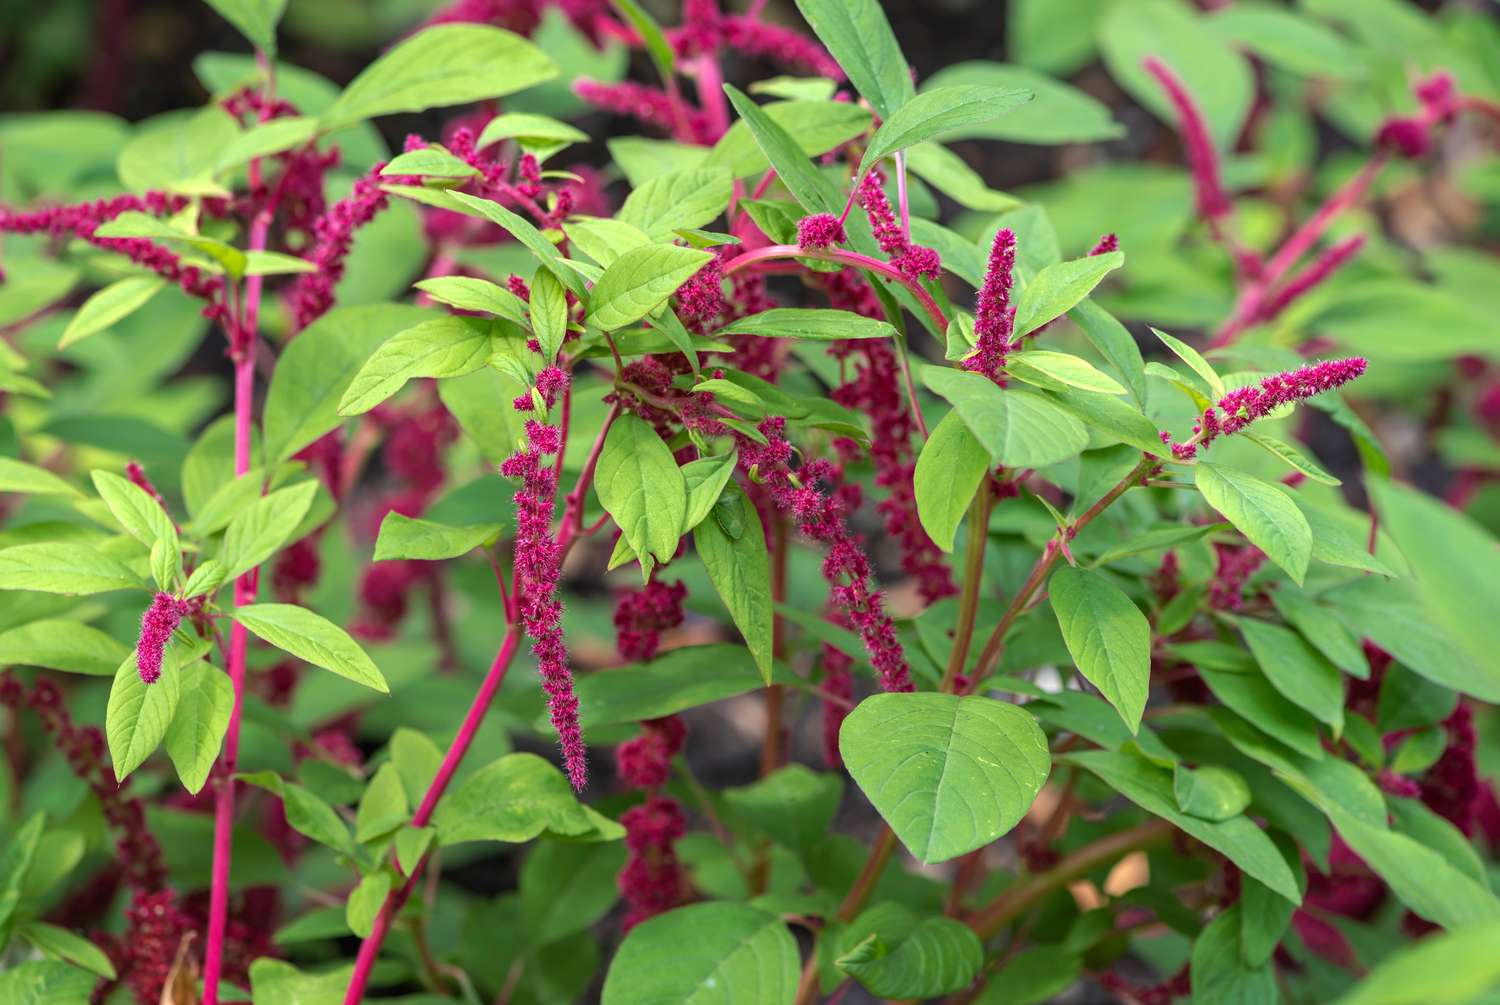 Love-lies-bleeding plant with bright green with fuchsia-colored drooping tassel-like flowers